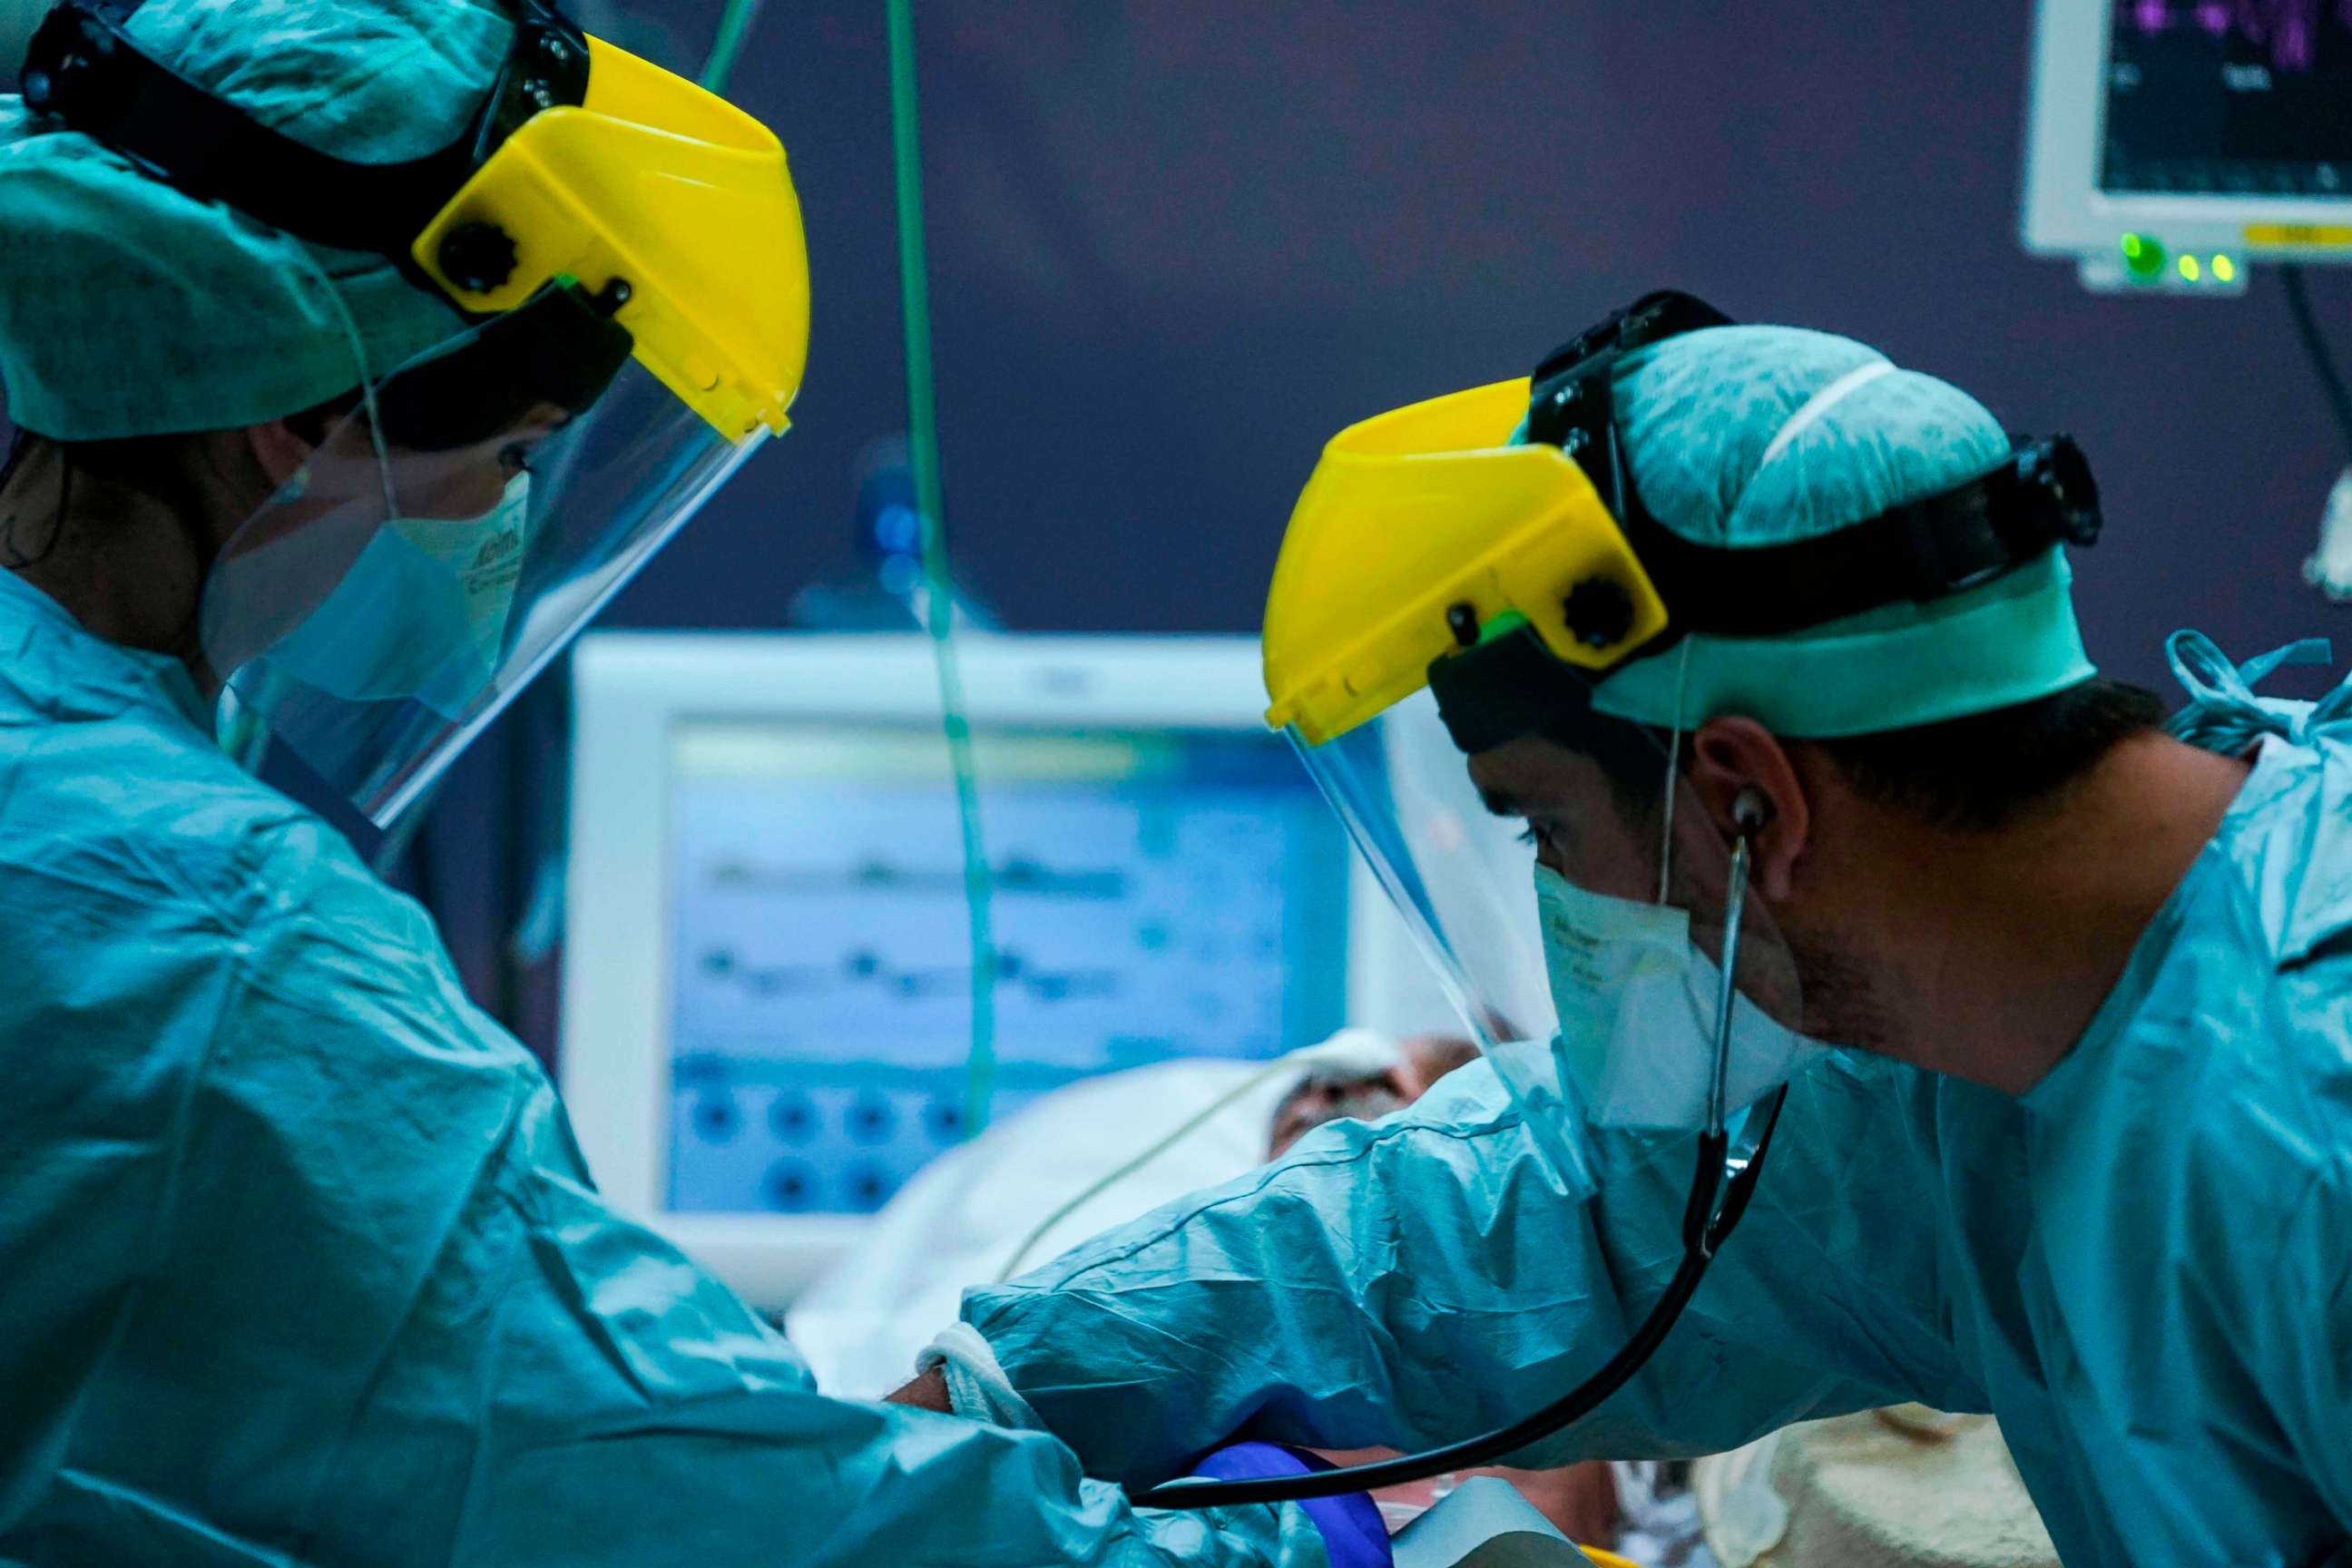 PHOTO: Medical workers wearing protective gear work at an intensive care unit for patients diagnosed with the novel coronavirus at Erasmus Hospital in Brussels on March 25, 2020, during a national lockdown in Belgium to curb the spread of the virus.